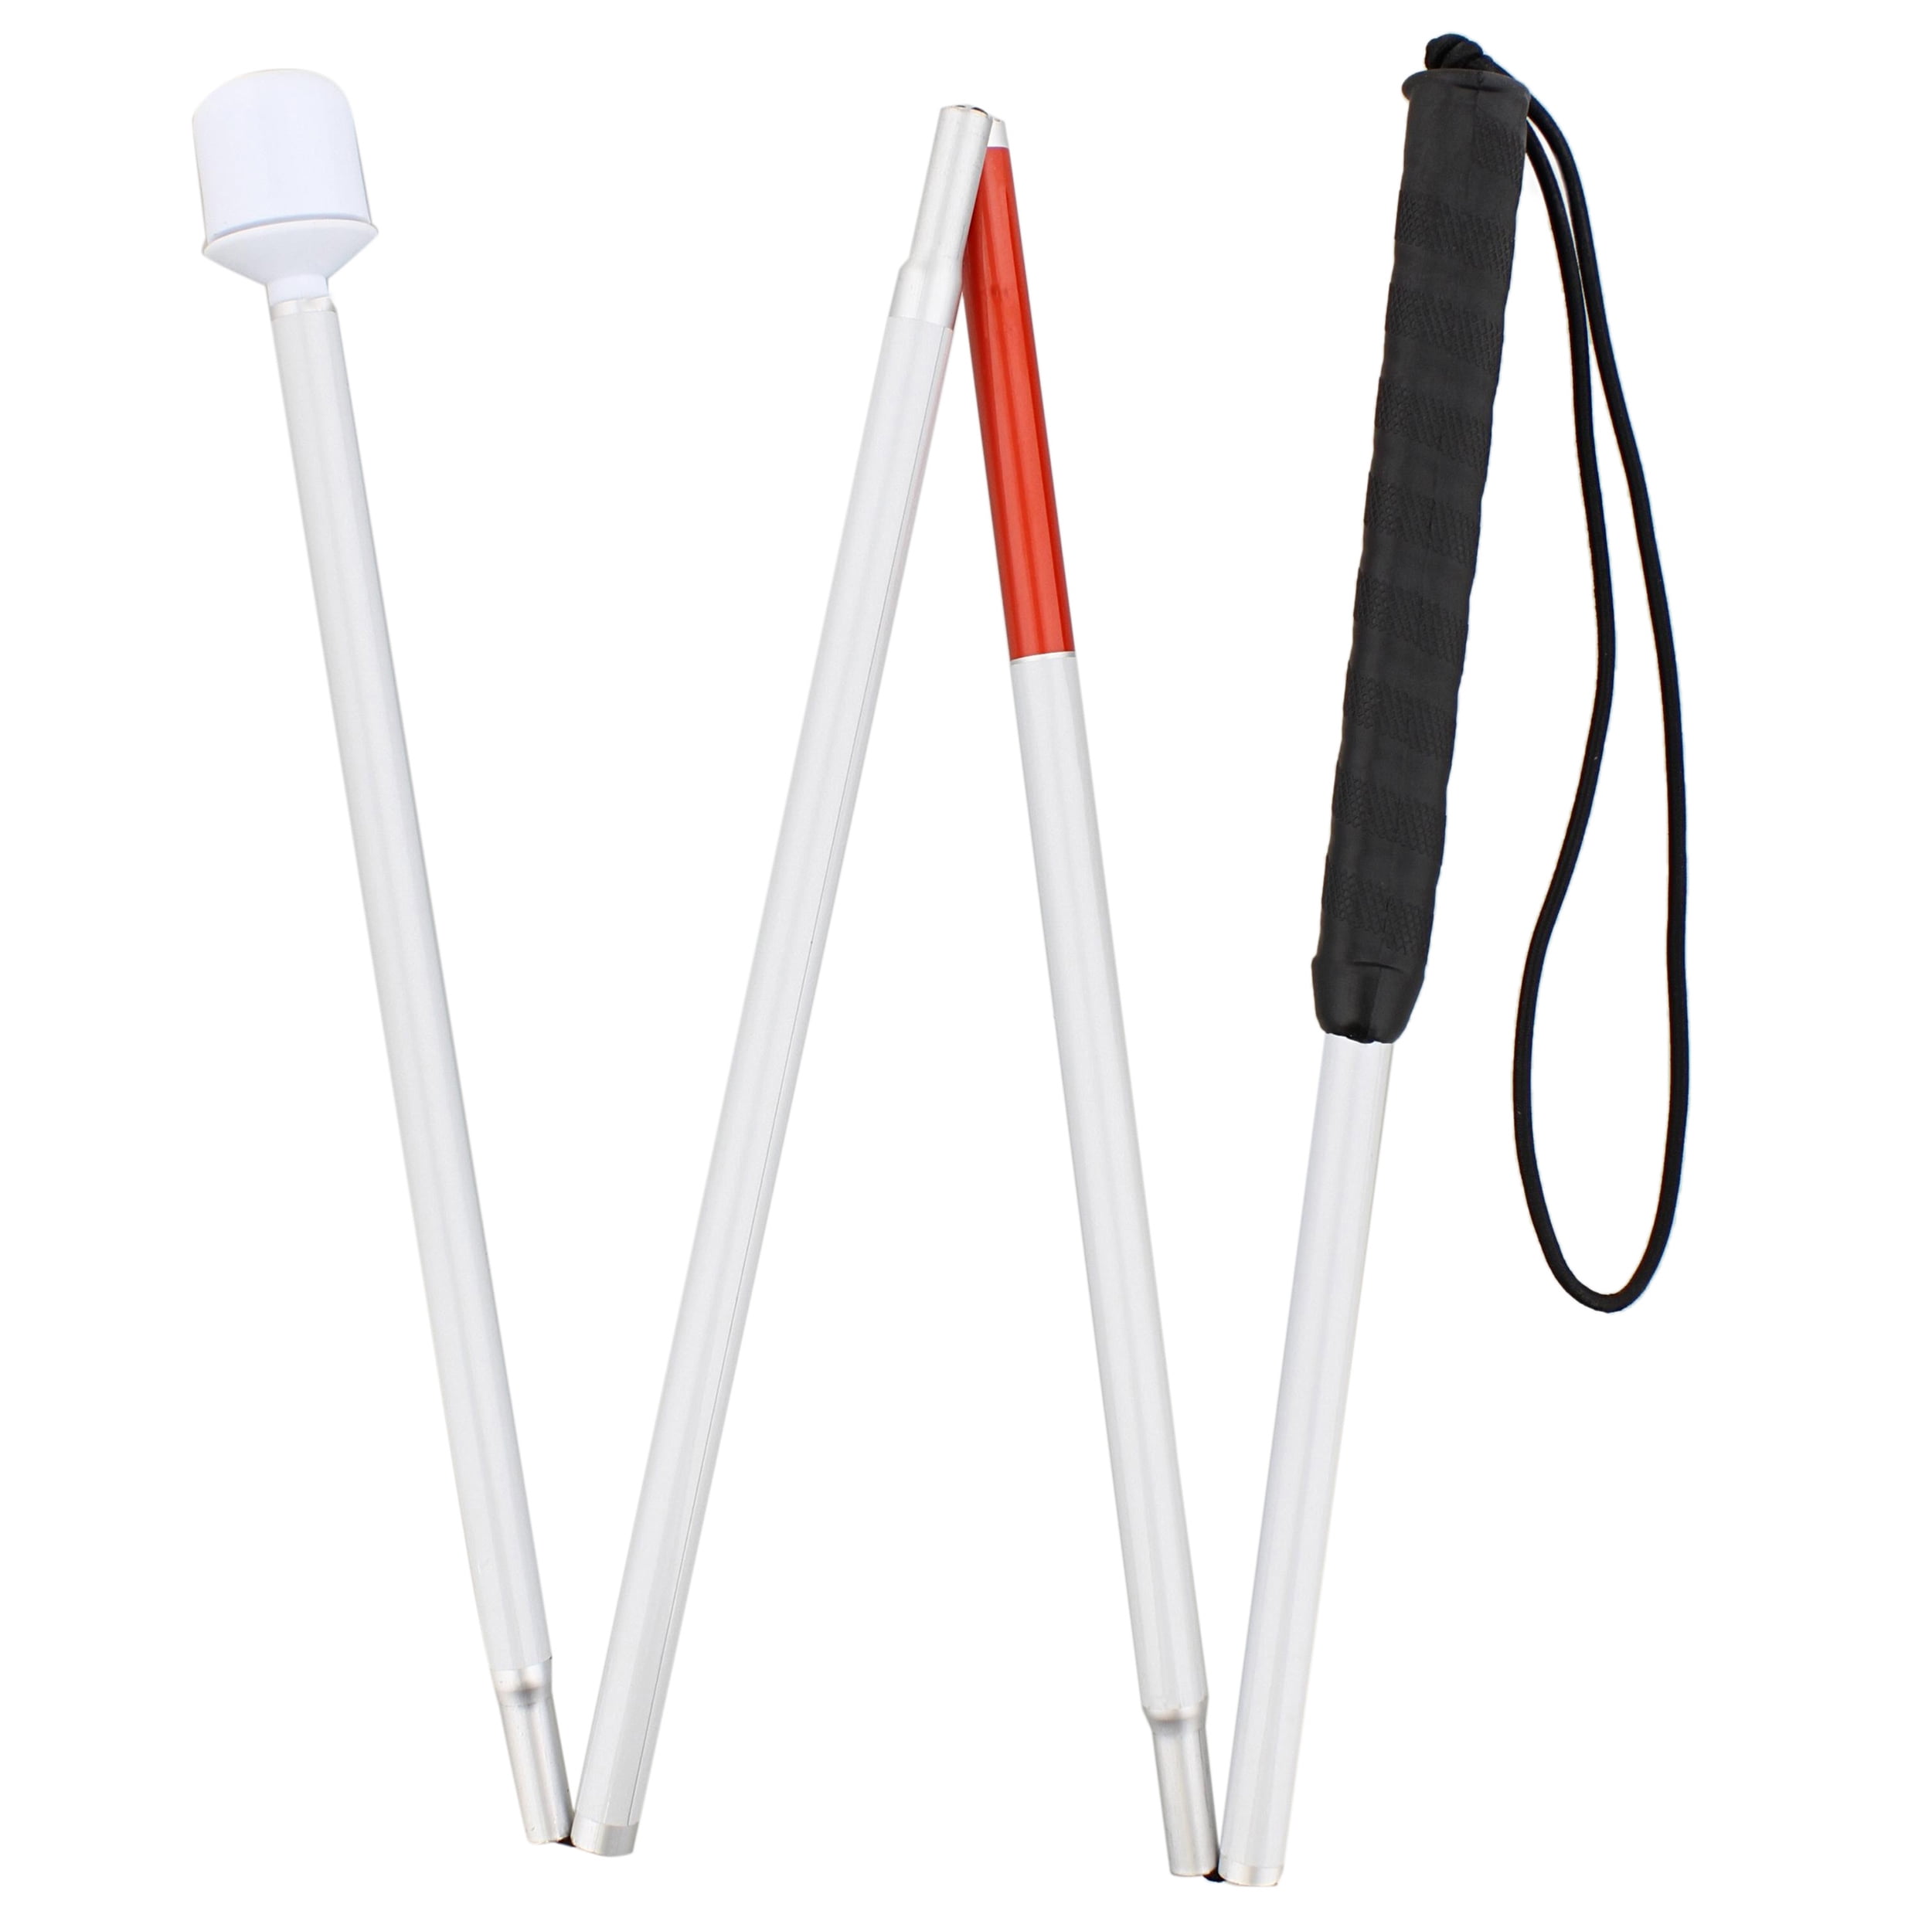 Folding Cane for Visually Impaired - B.T. Medical Supplies LLC